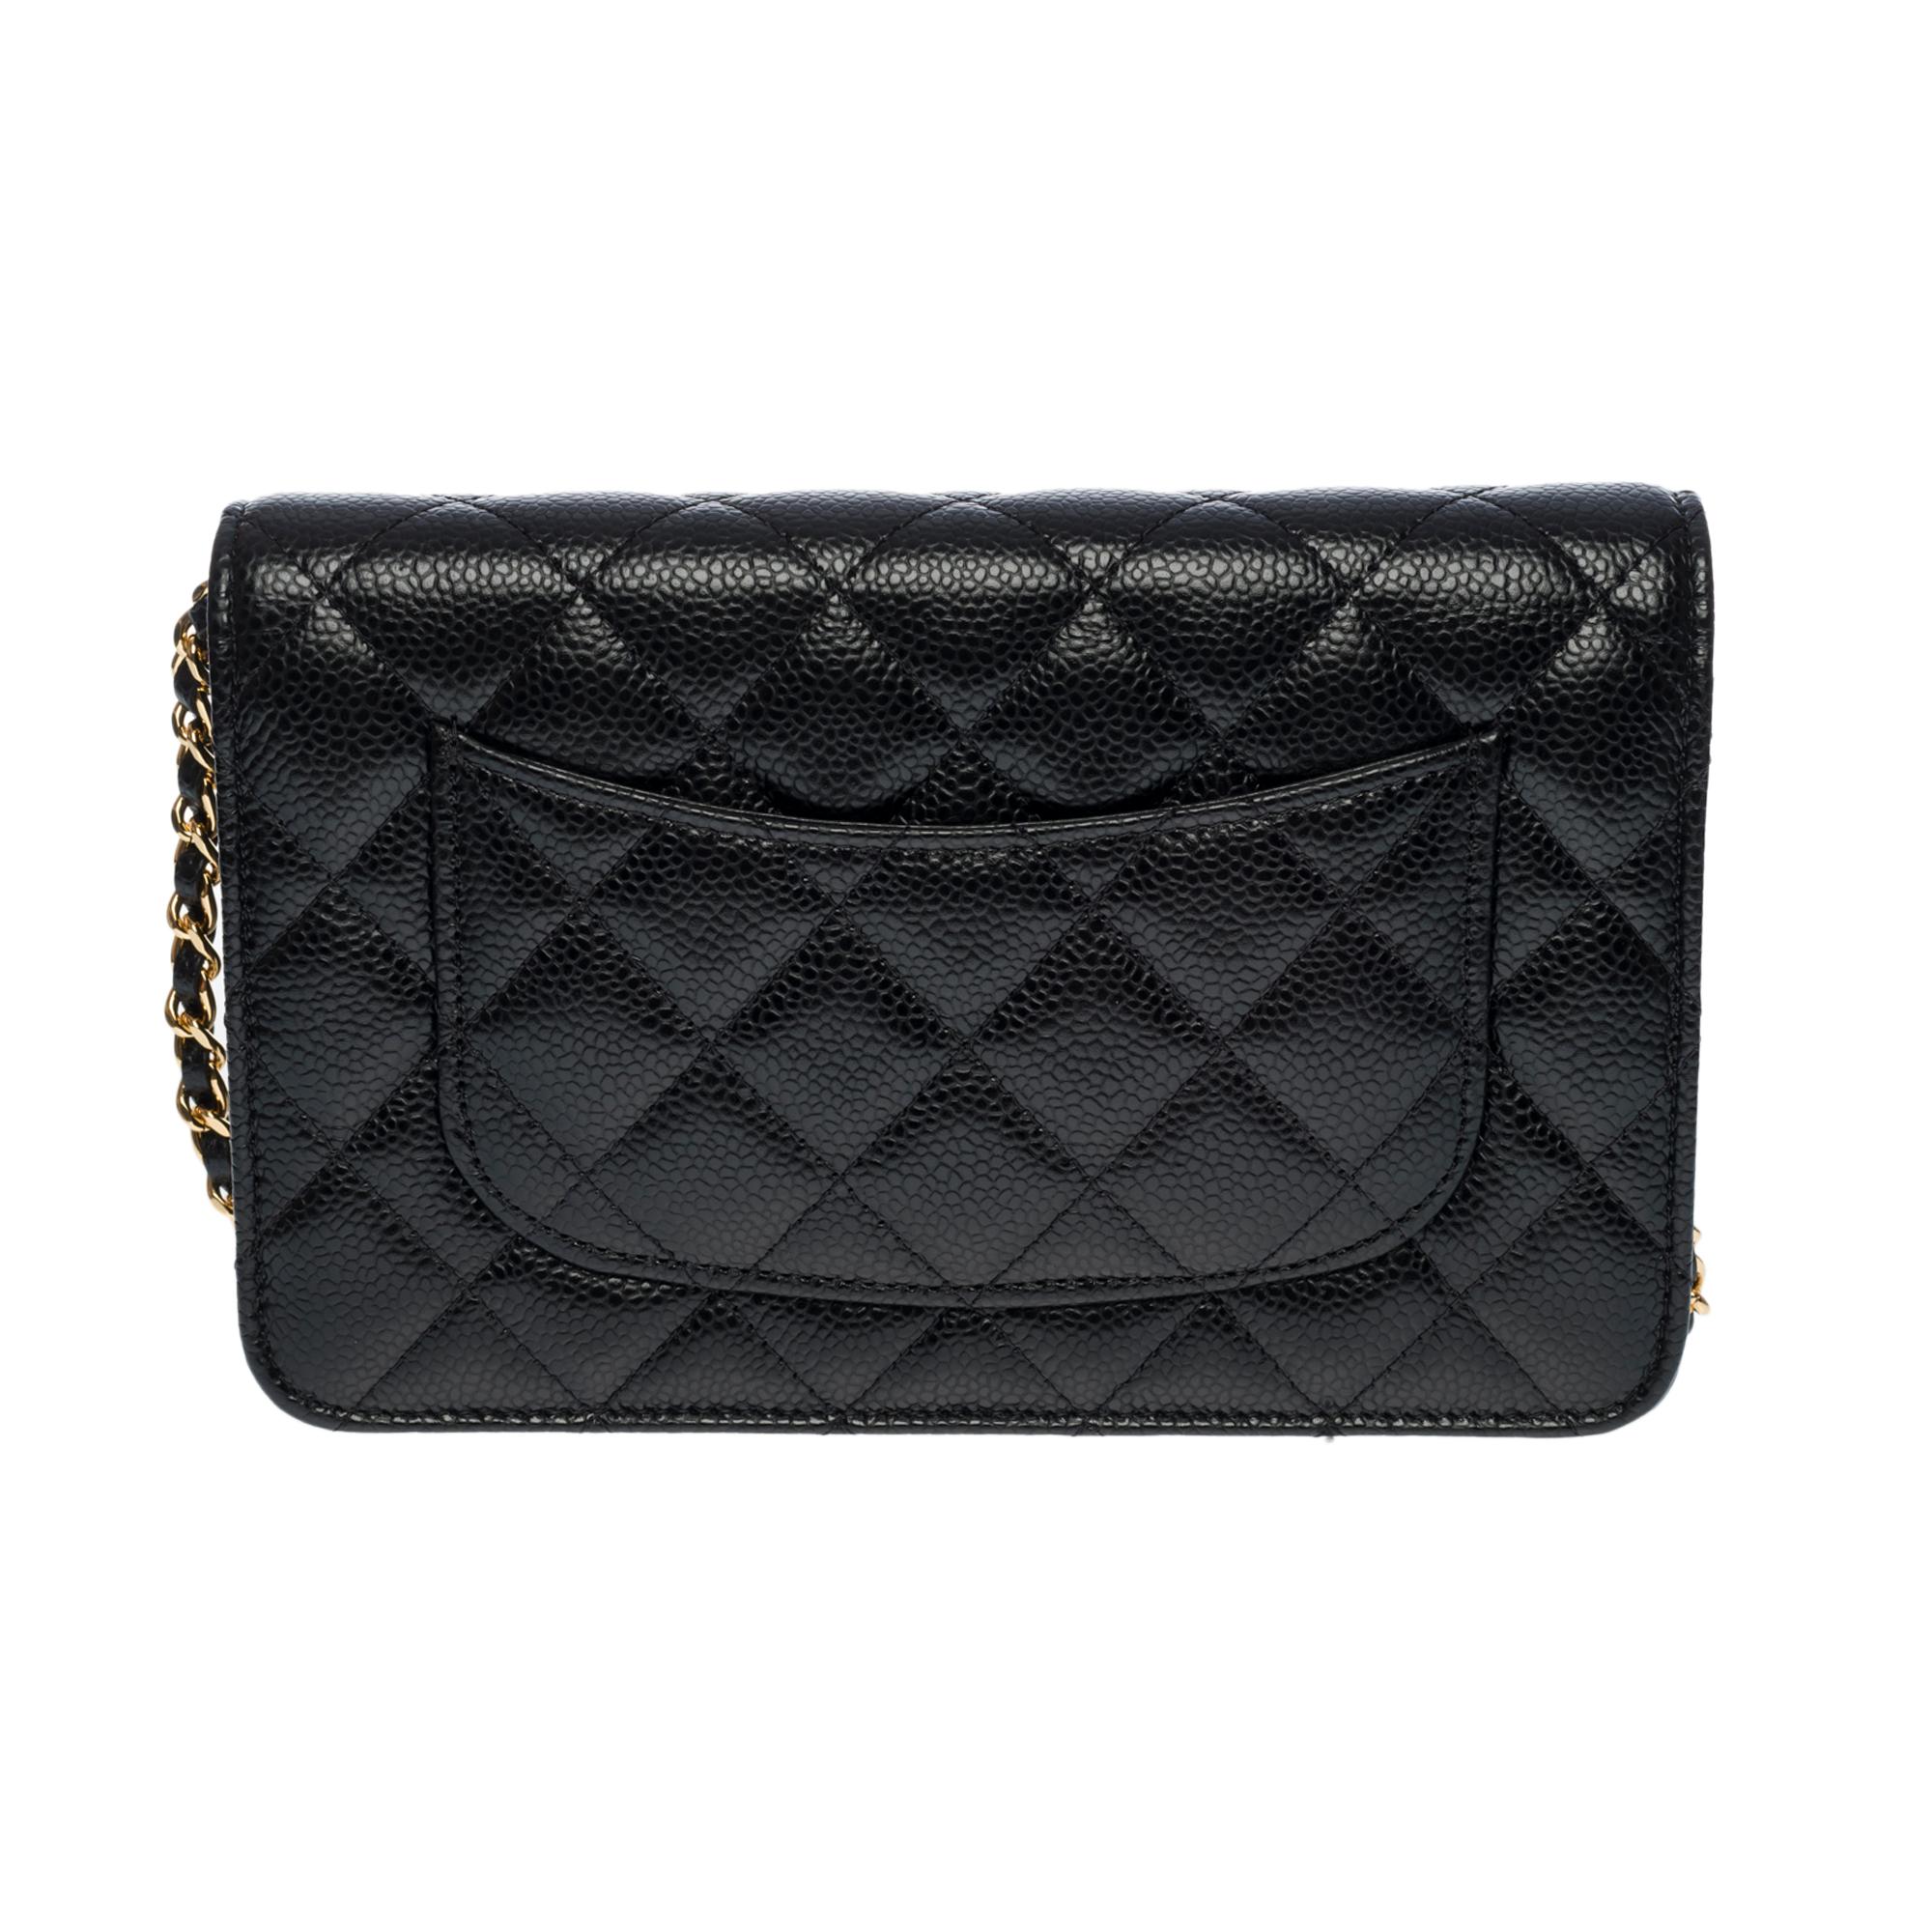 Black Chanel Wallet on Chain (WOC)  shoulder bag in black Caviar quilted leather, GHW